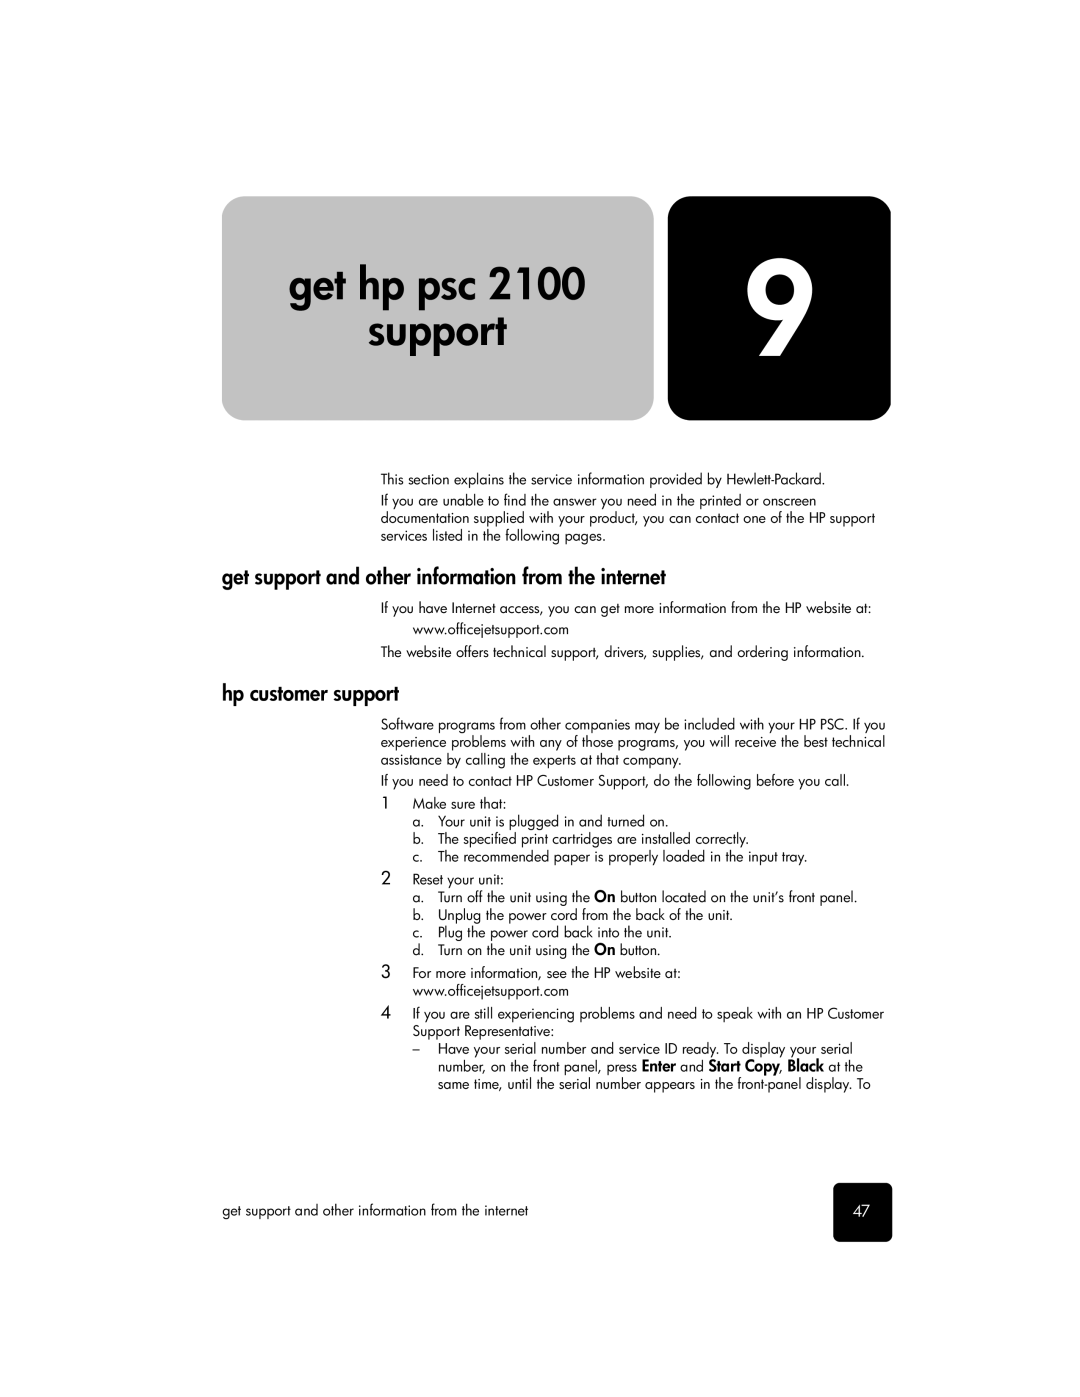 HP 2100 manual Get hp psc Support, Get support and other information from the internet, Hp customer support 